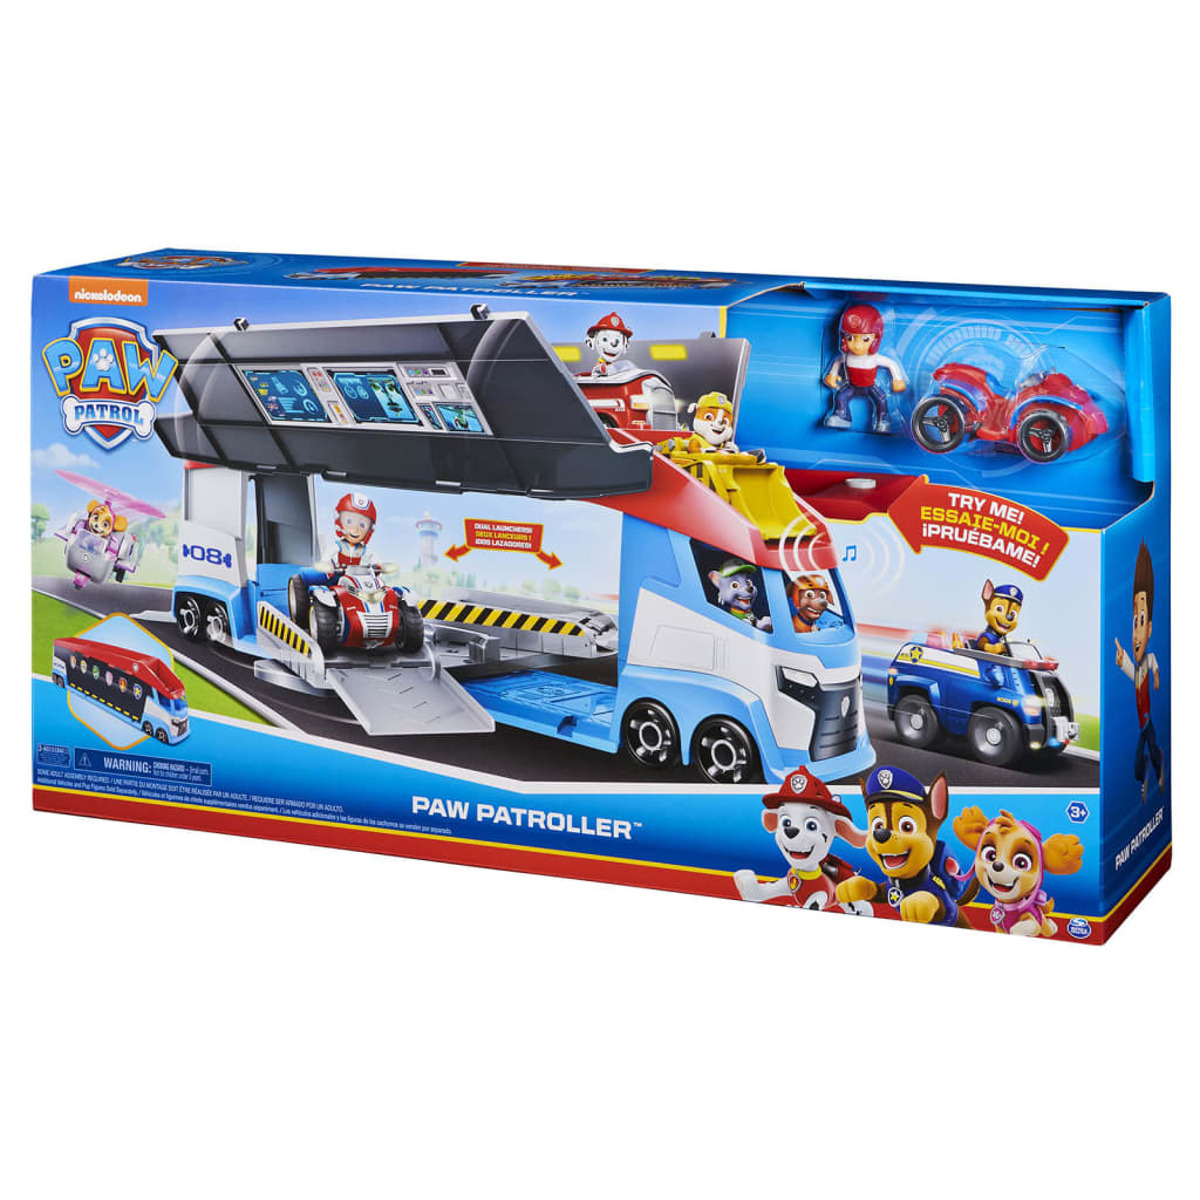 SPIN MASTER PAW PATROLLER 2.0 33143 Spielset PAW